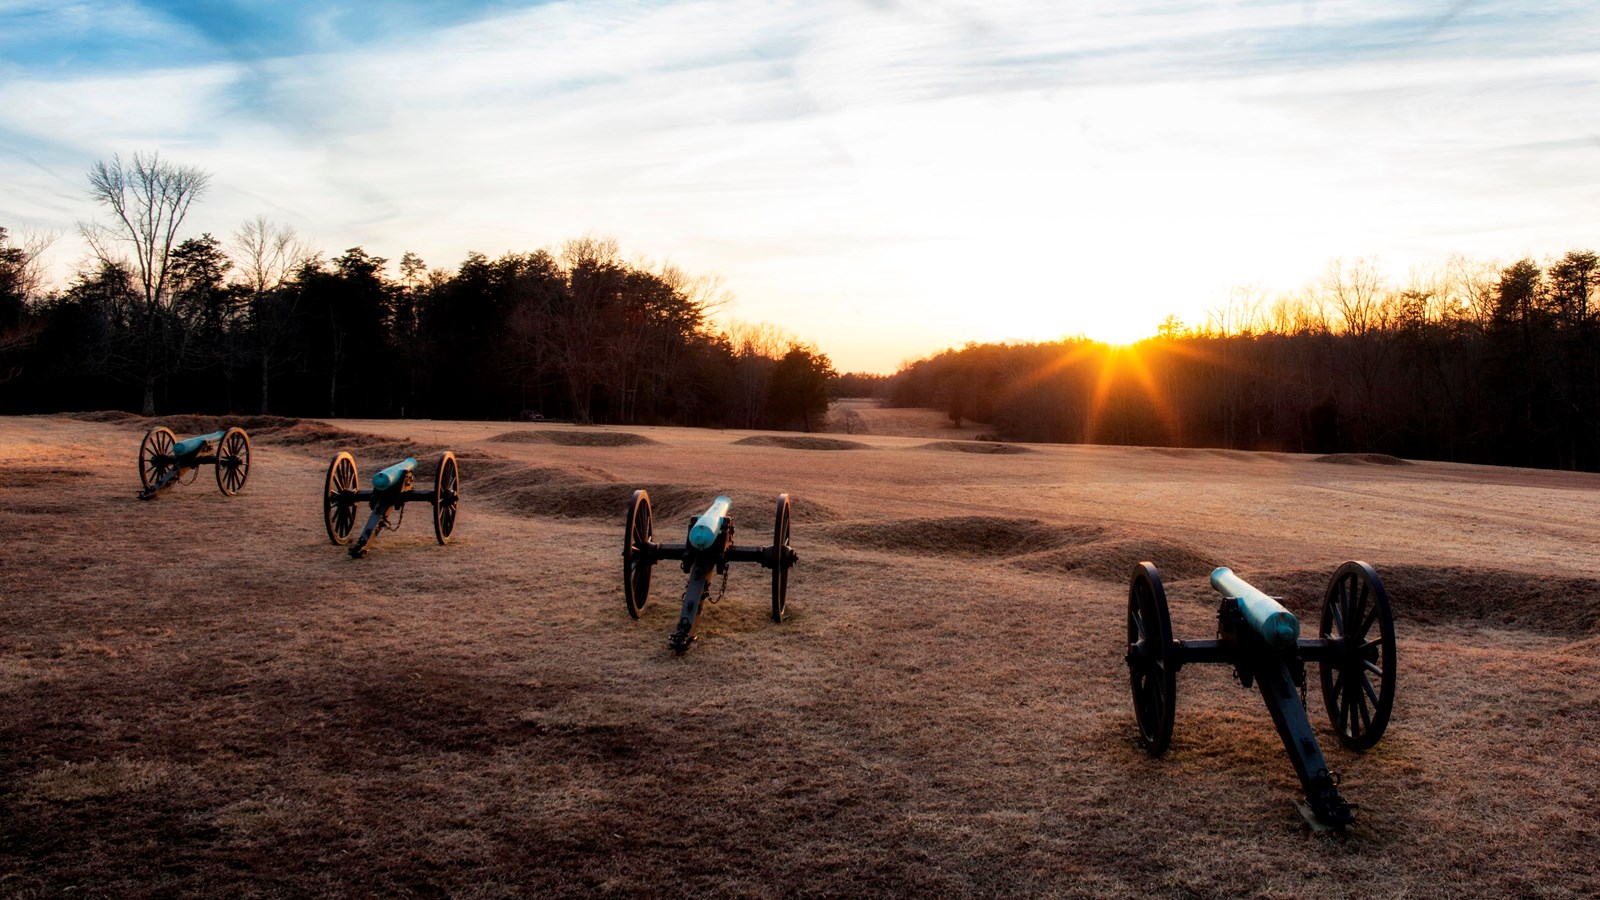 A line of cannons pointed across an open field at sunrise.